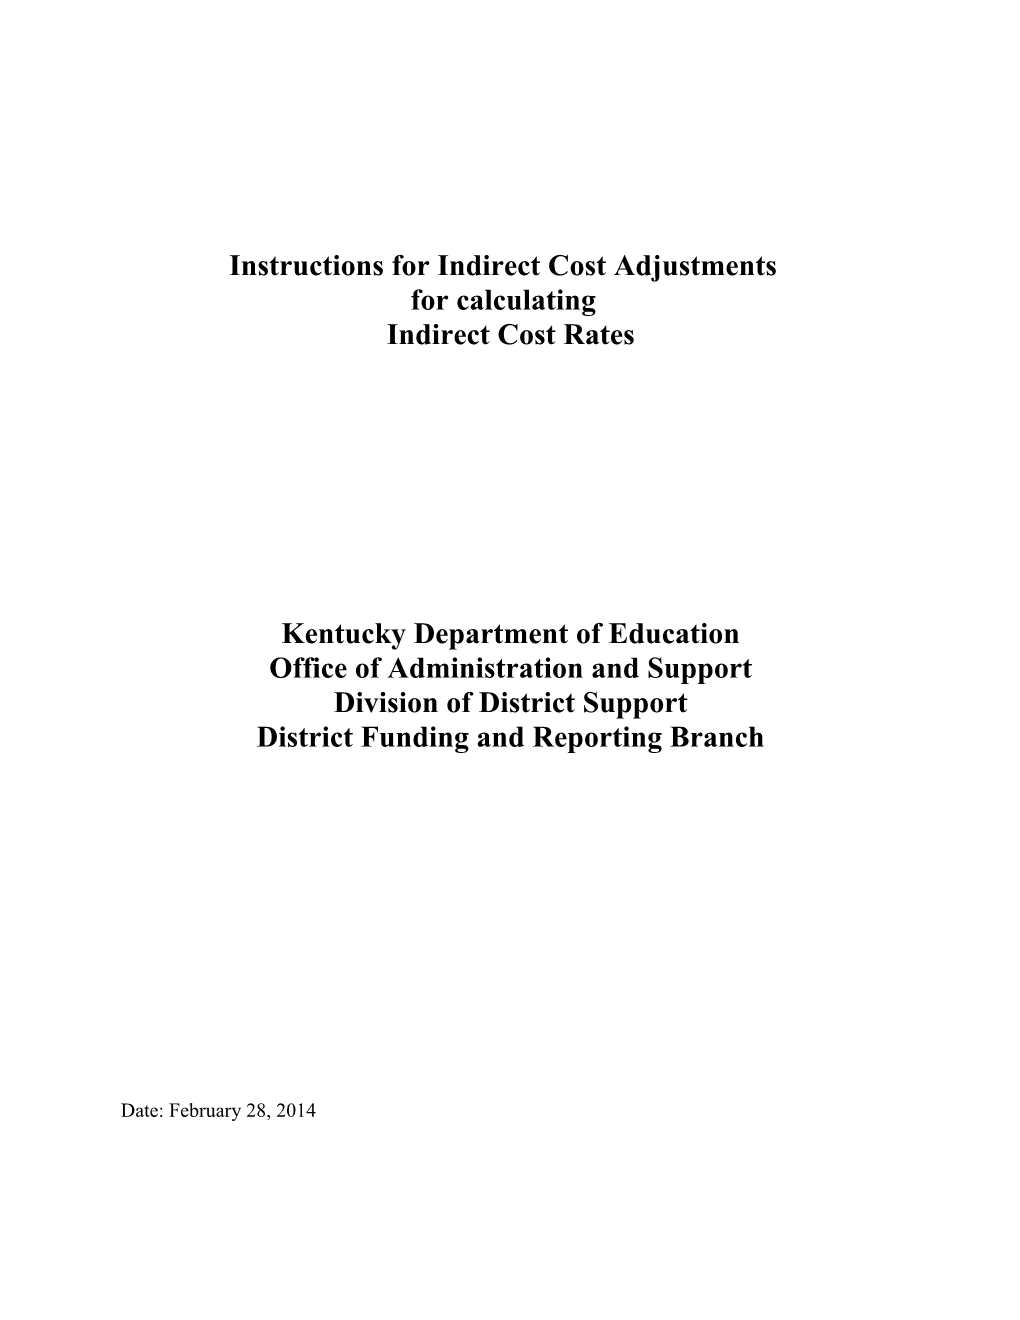 Instructions for Indirect Cost Adjustments